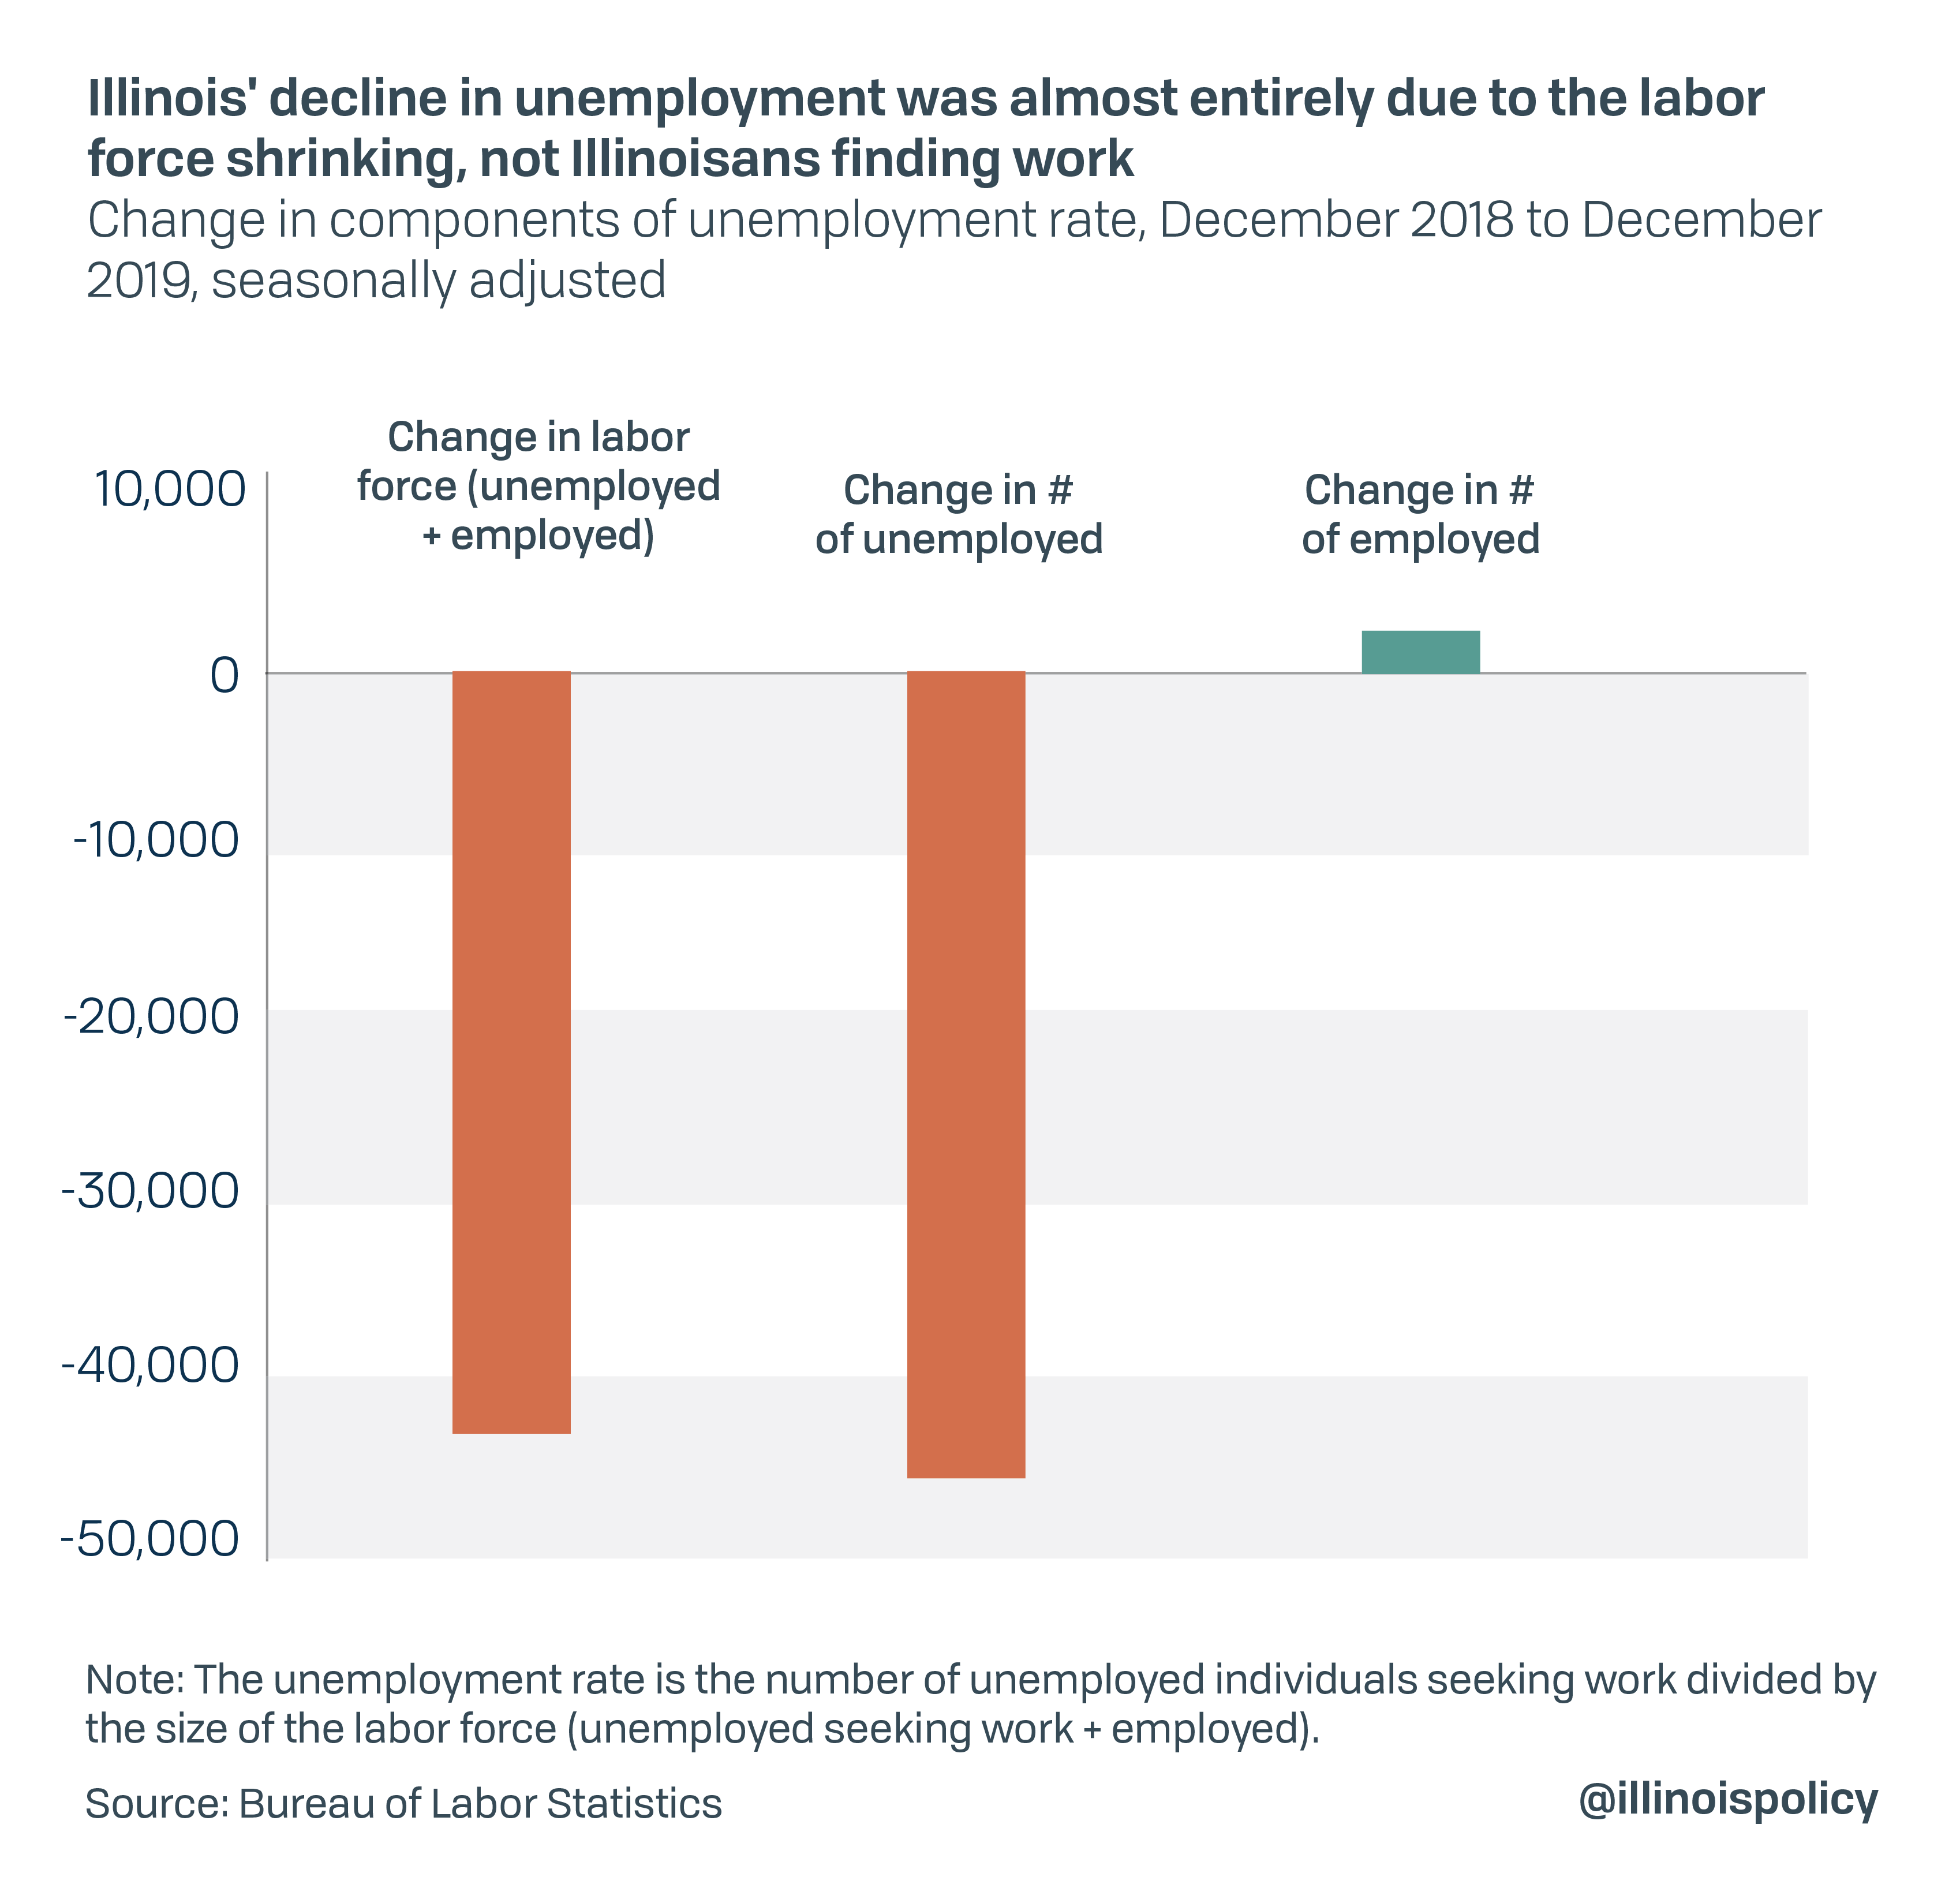 Illinois' decline in unemployment was almost entirely due to the labor force shrinking, not Illinoisans finding work